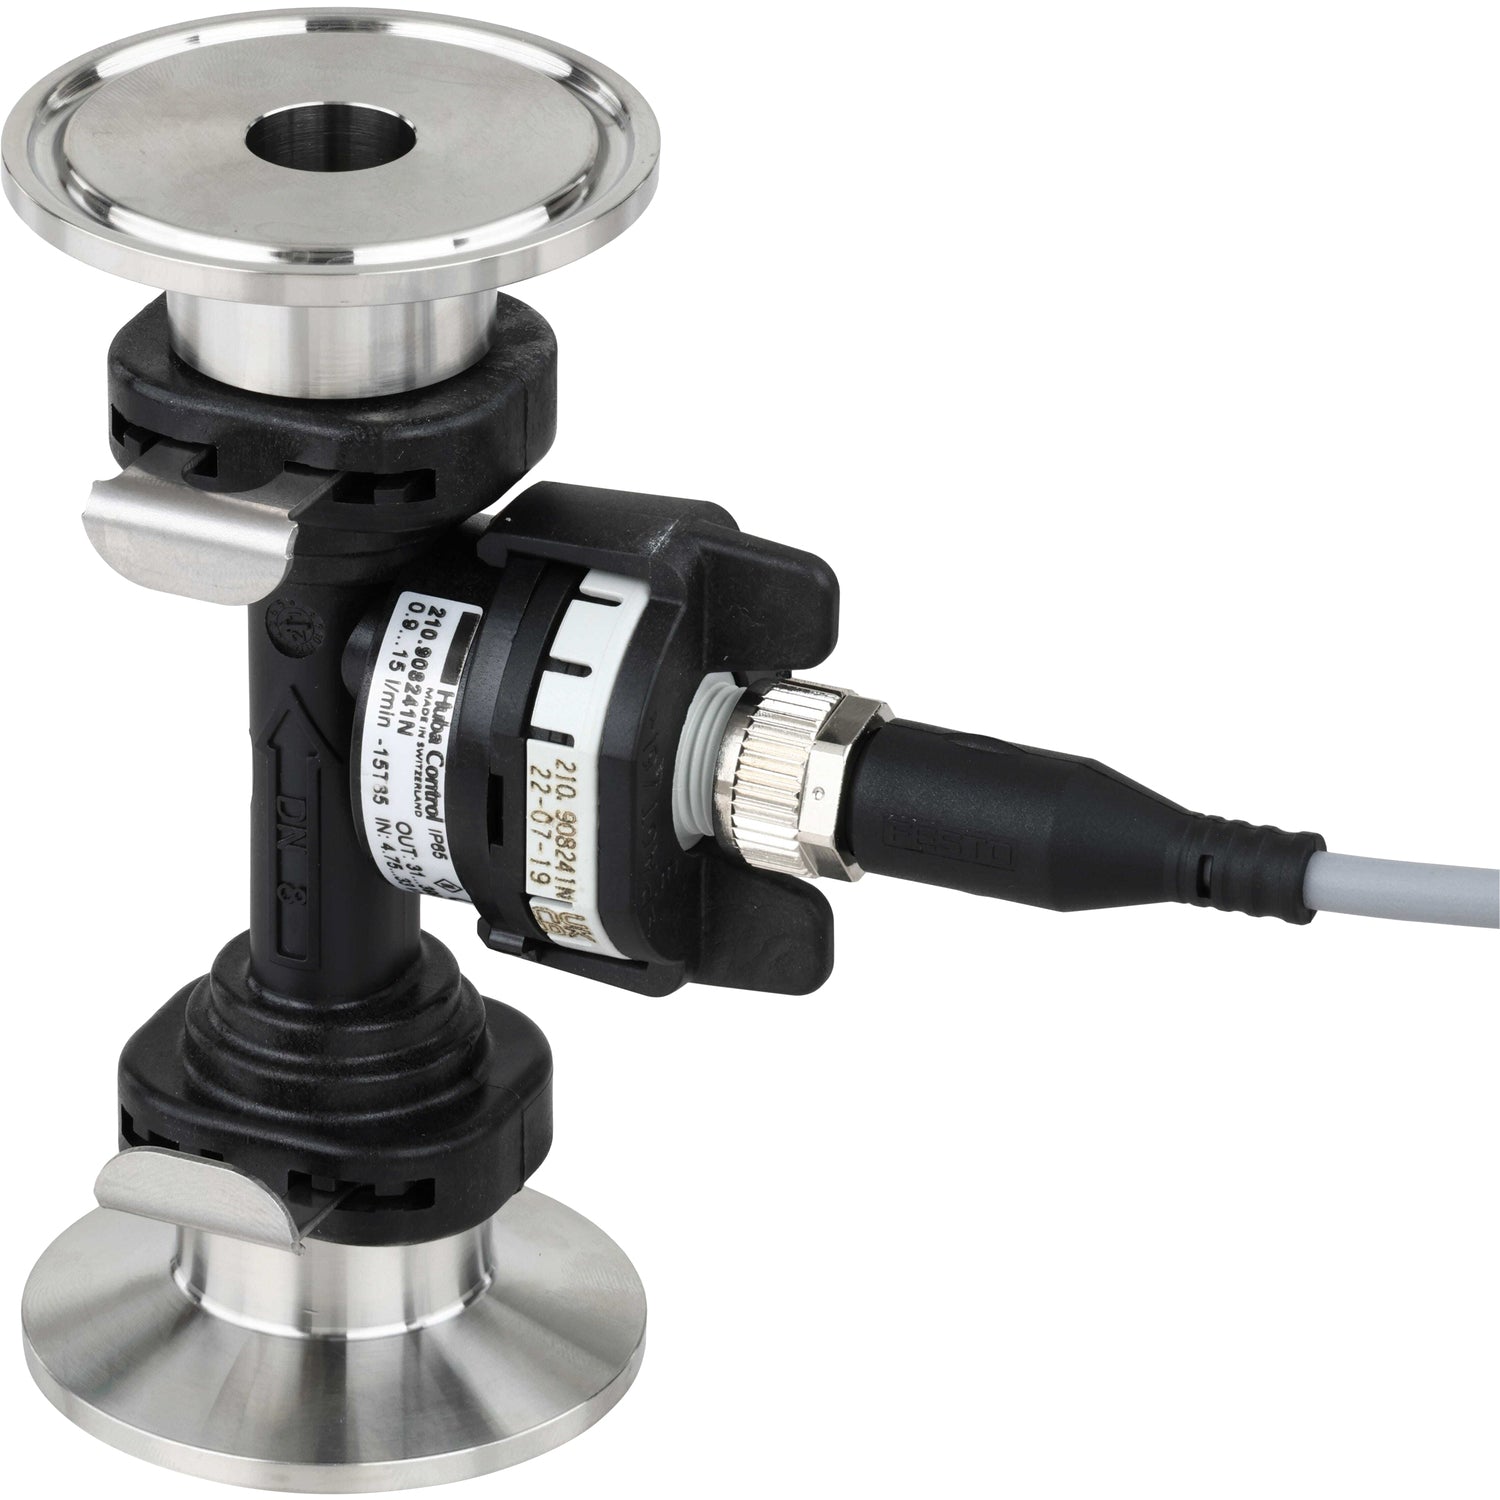 Black and white flow sensor with 1.5 inch stainless steel tri-clamp fittings on each end and a sensor cable connected to the center of part. This part is shown on a white background. 